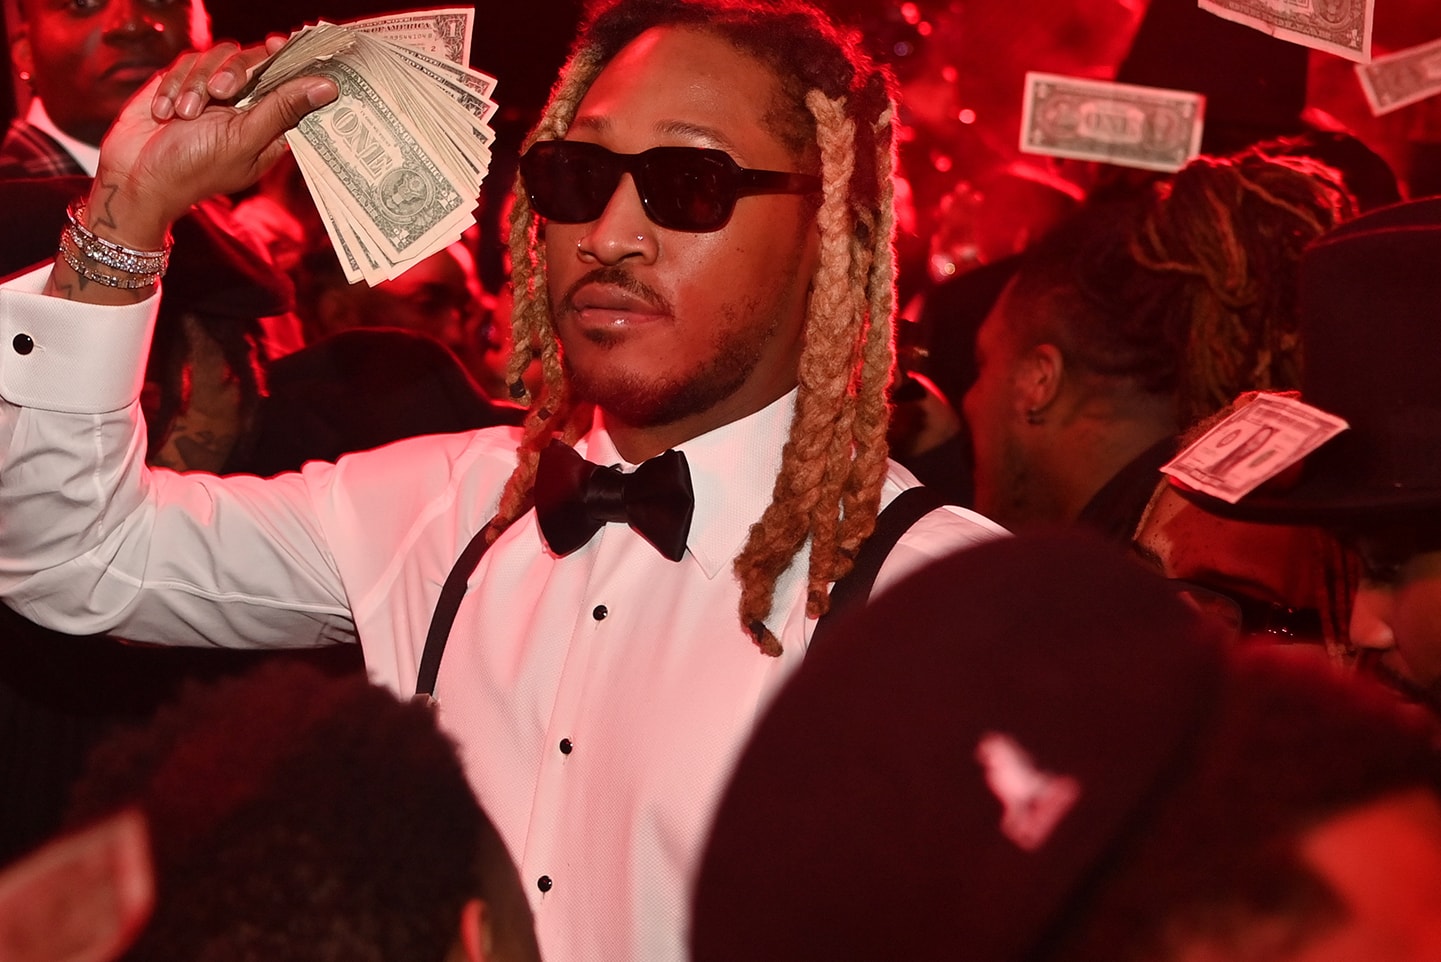 RIAA Gives Future Plaque 95 Million Certified Units